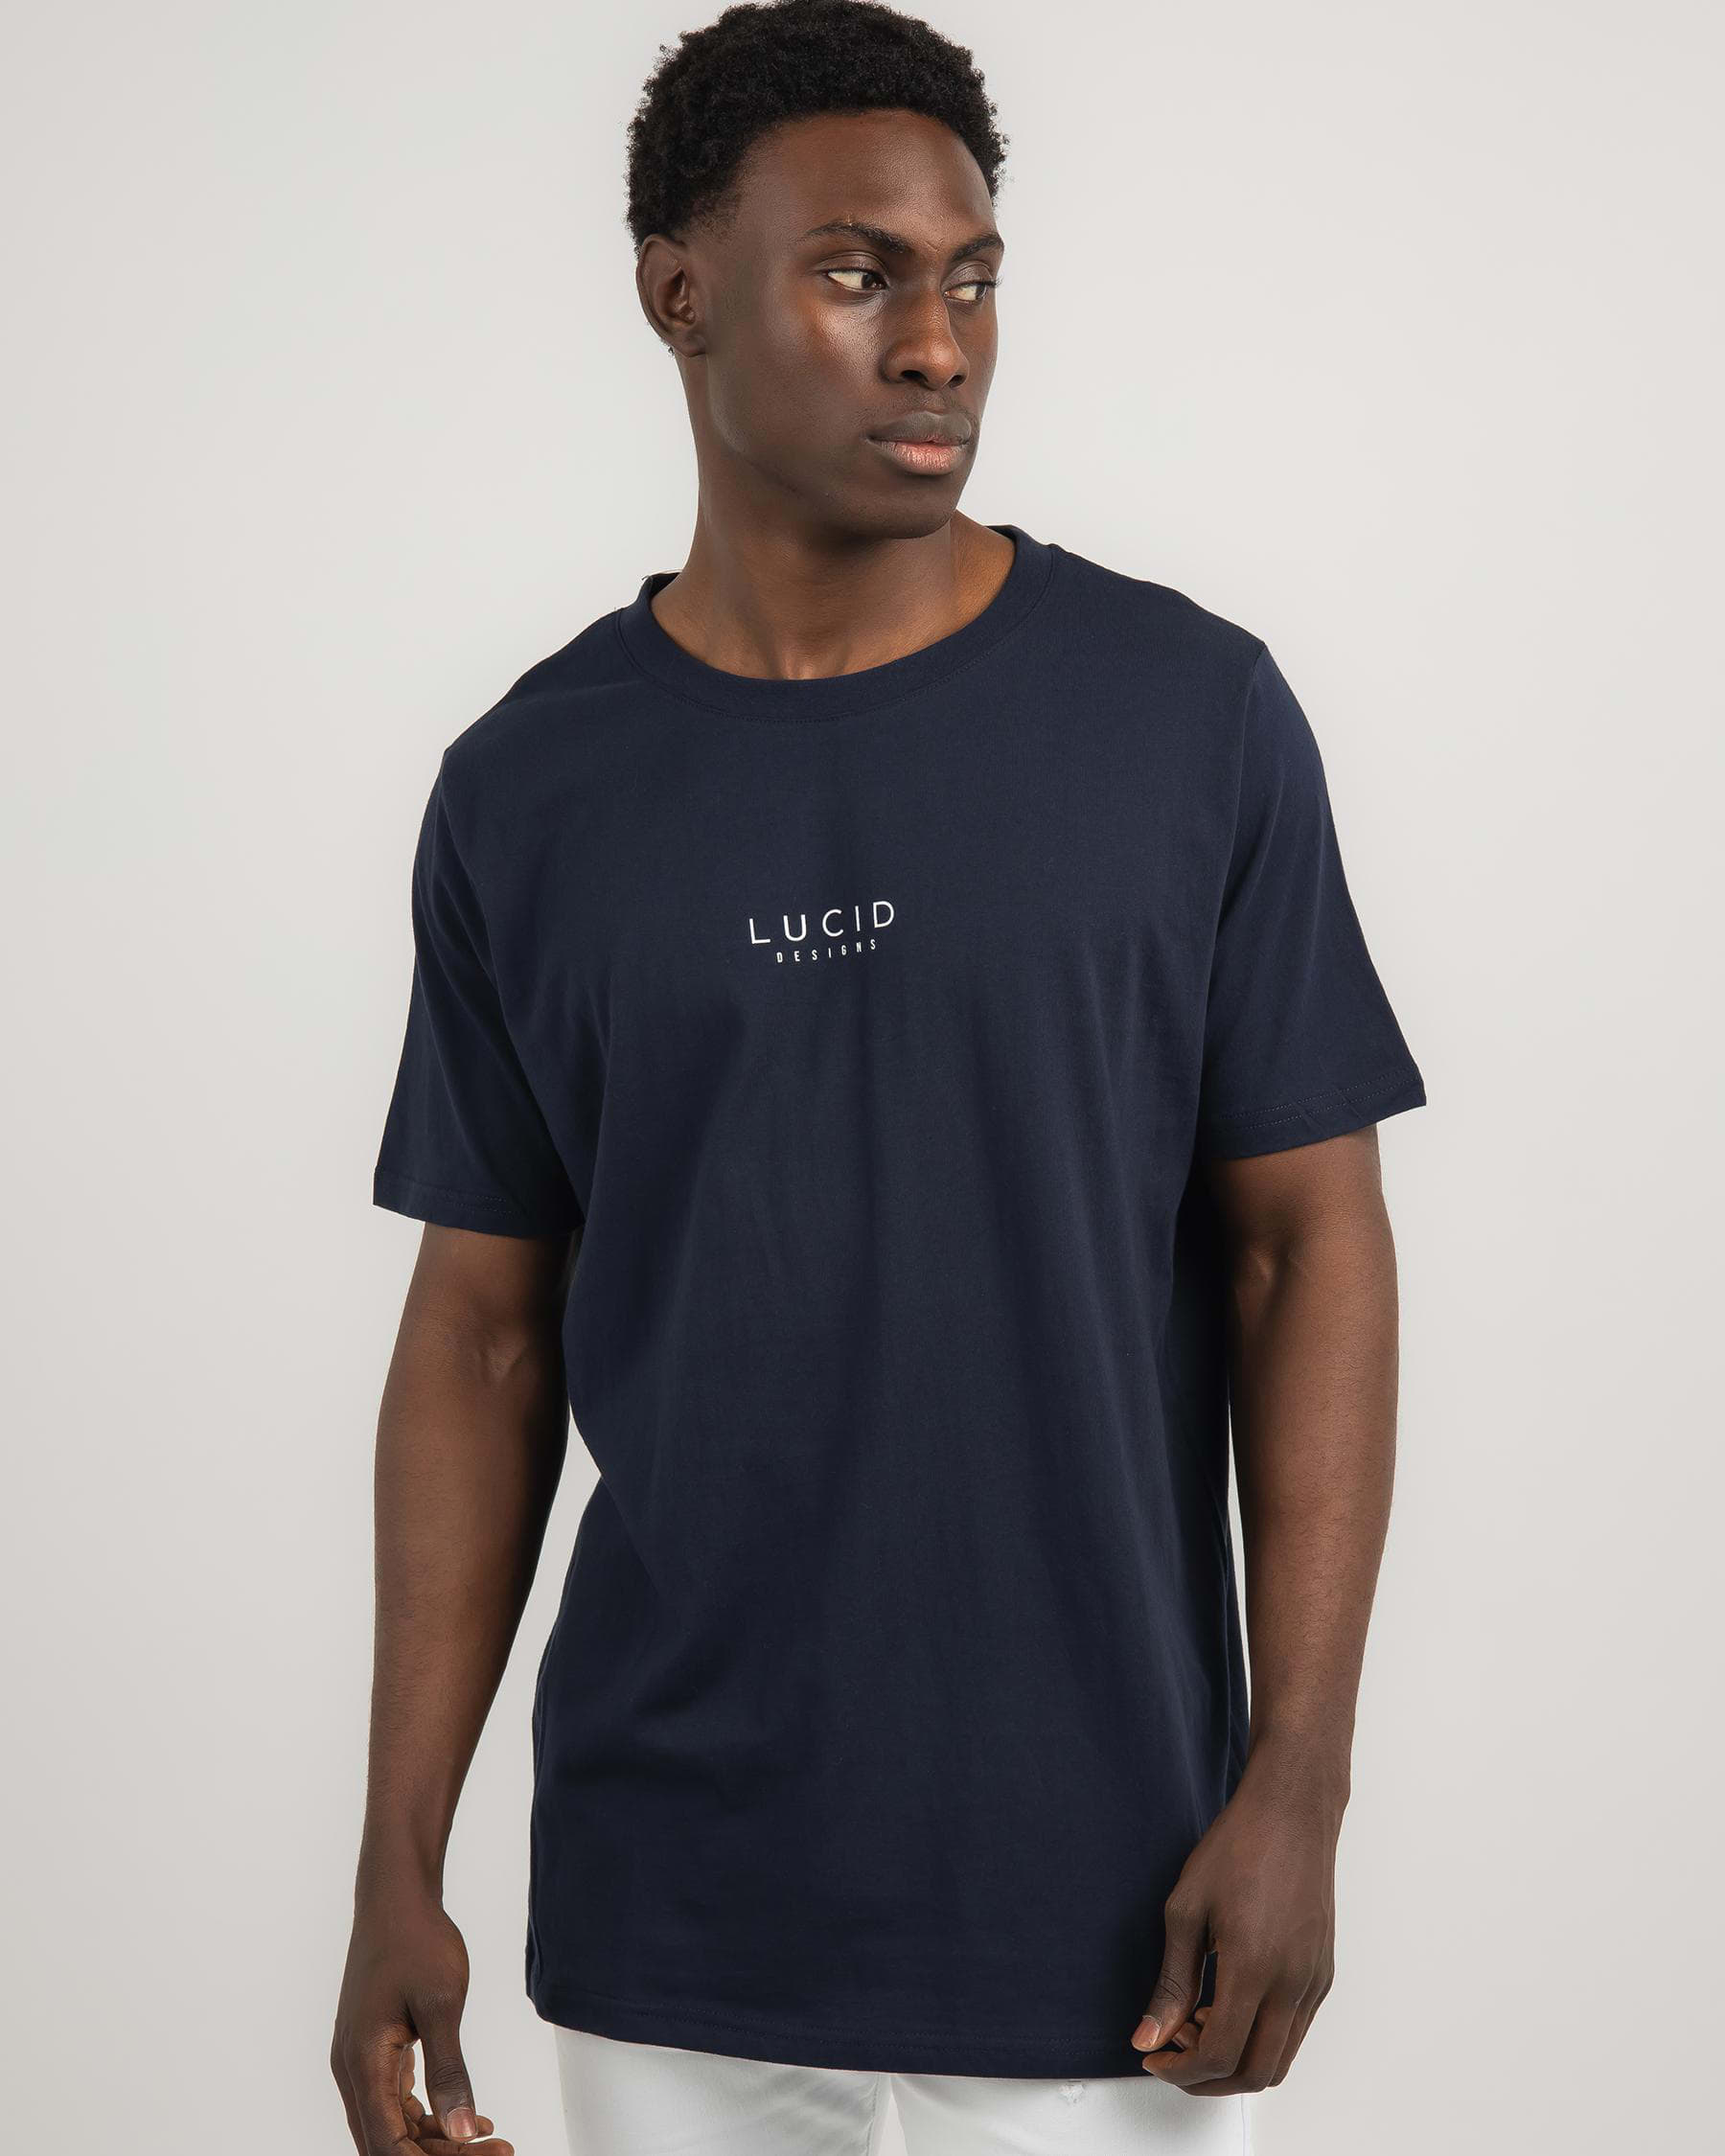 Lucid Exposure T-Shirt In Navy - Fast Shipping & Easy Returns - City ...